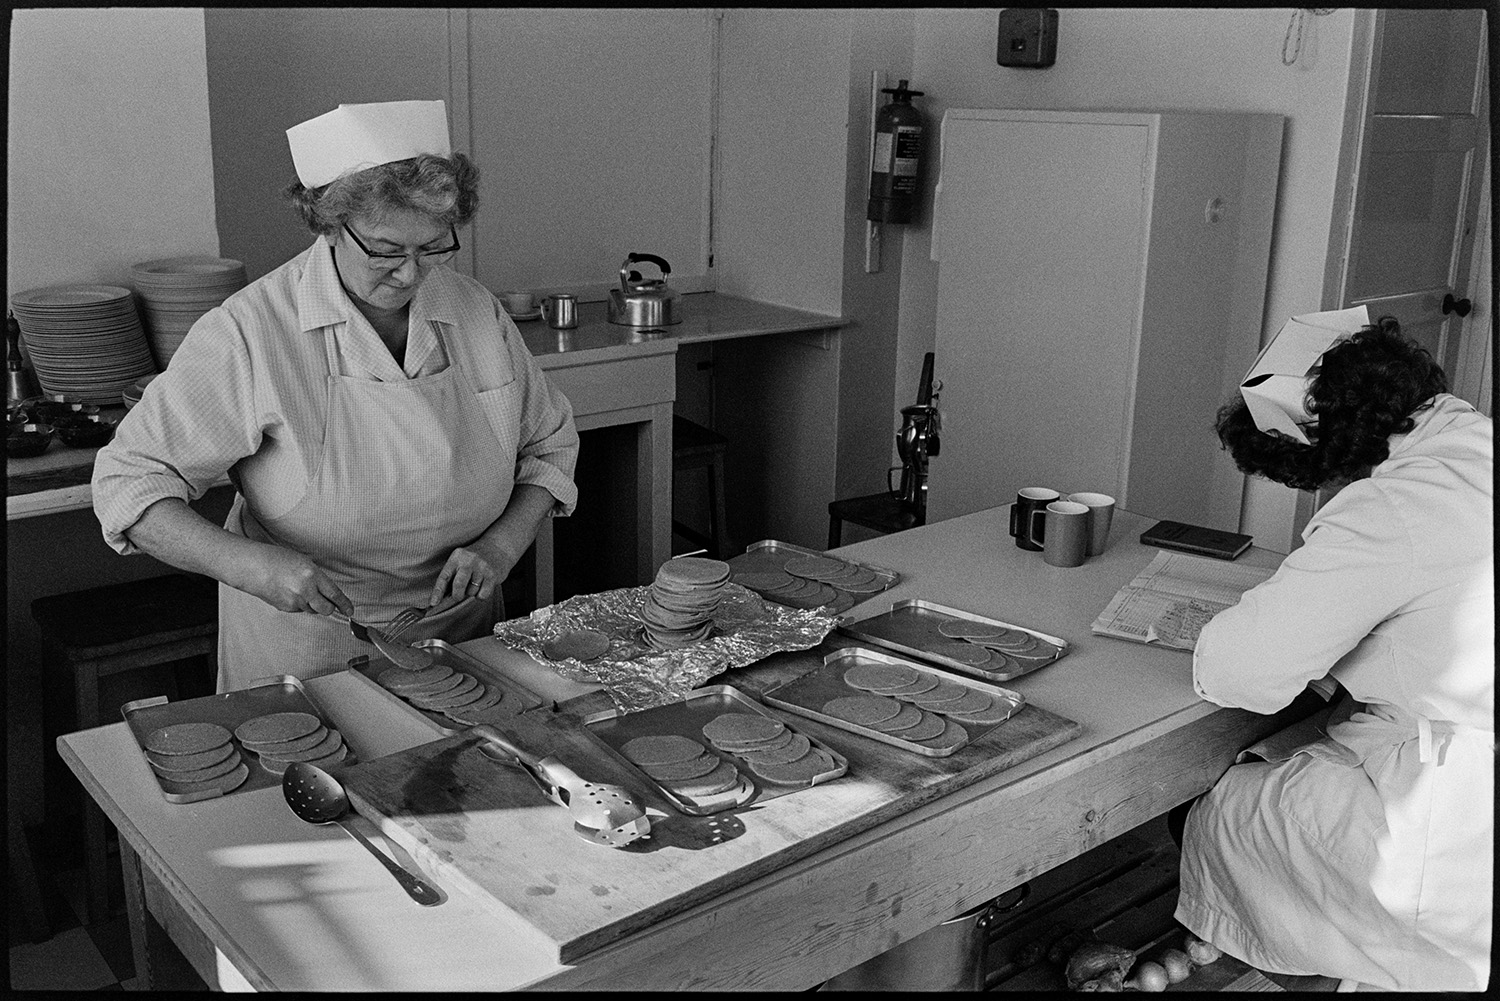 School dinner ladies doing accounts and preparing food in the kitchen. 
[School dinner ladies in the school canteen at Burrington Primary School. One is preparing food and the other is writing up the accounts in a ledger.]